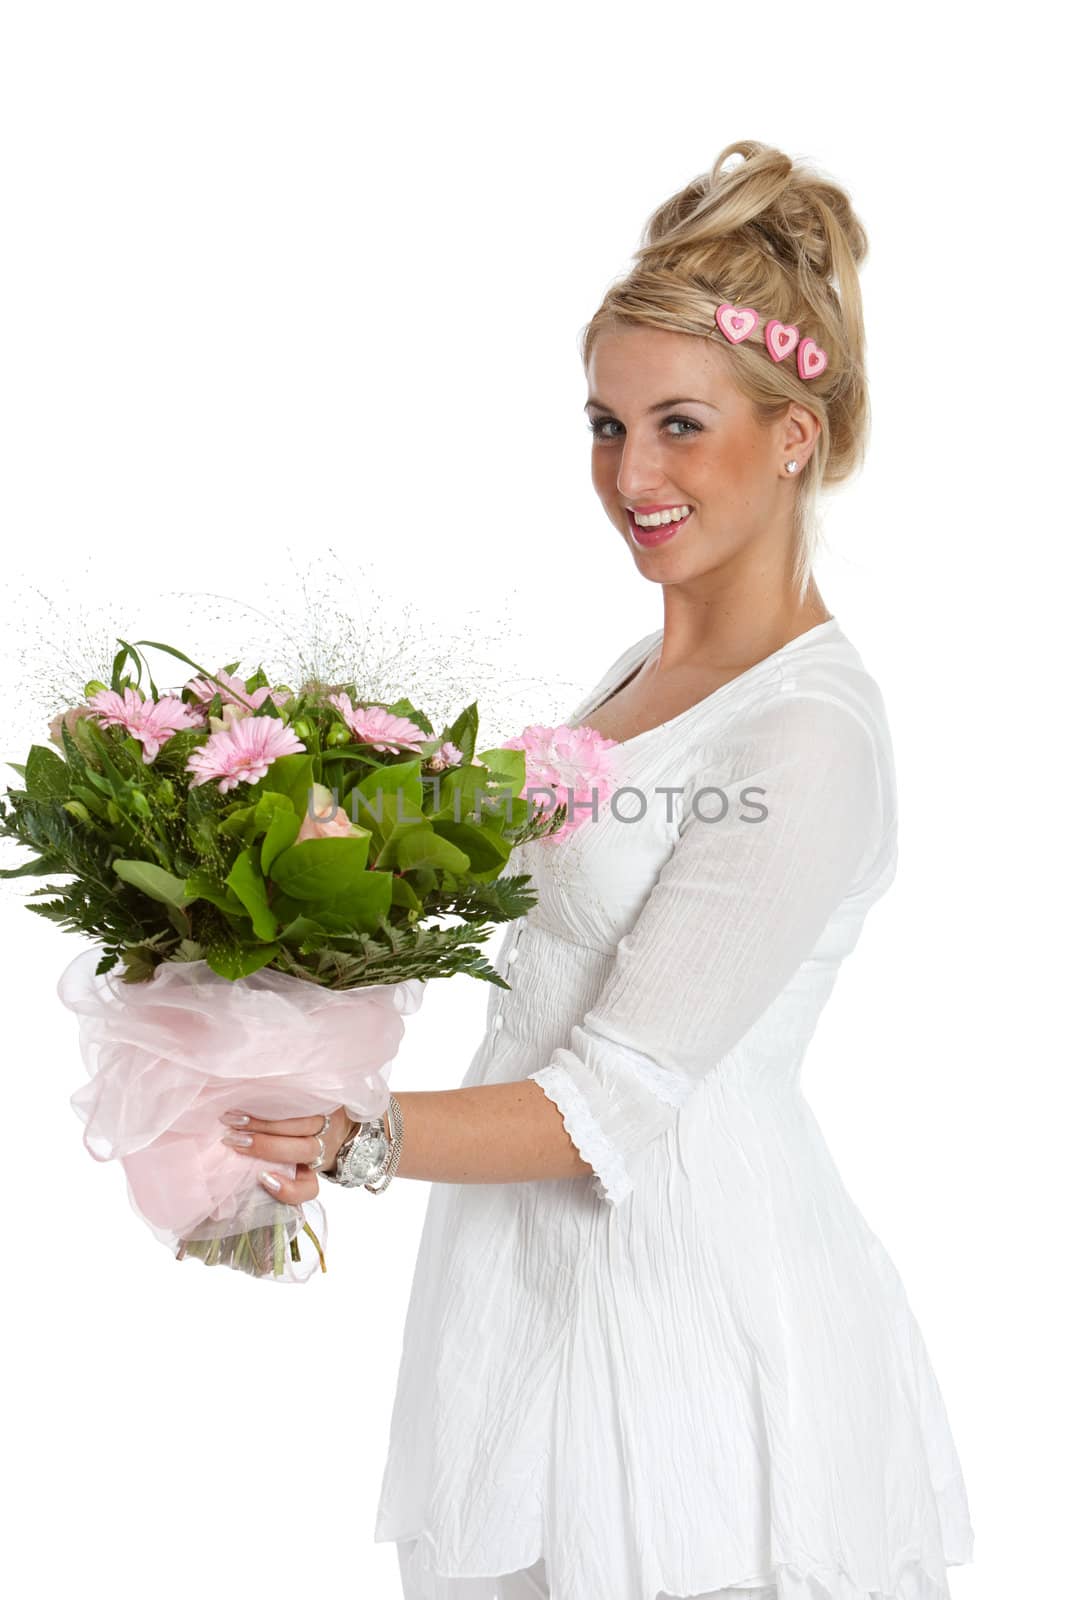 Pretty blond girl looking happy with a bouquet of flowers in her hands